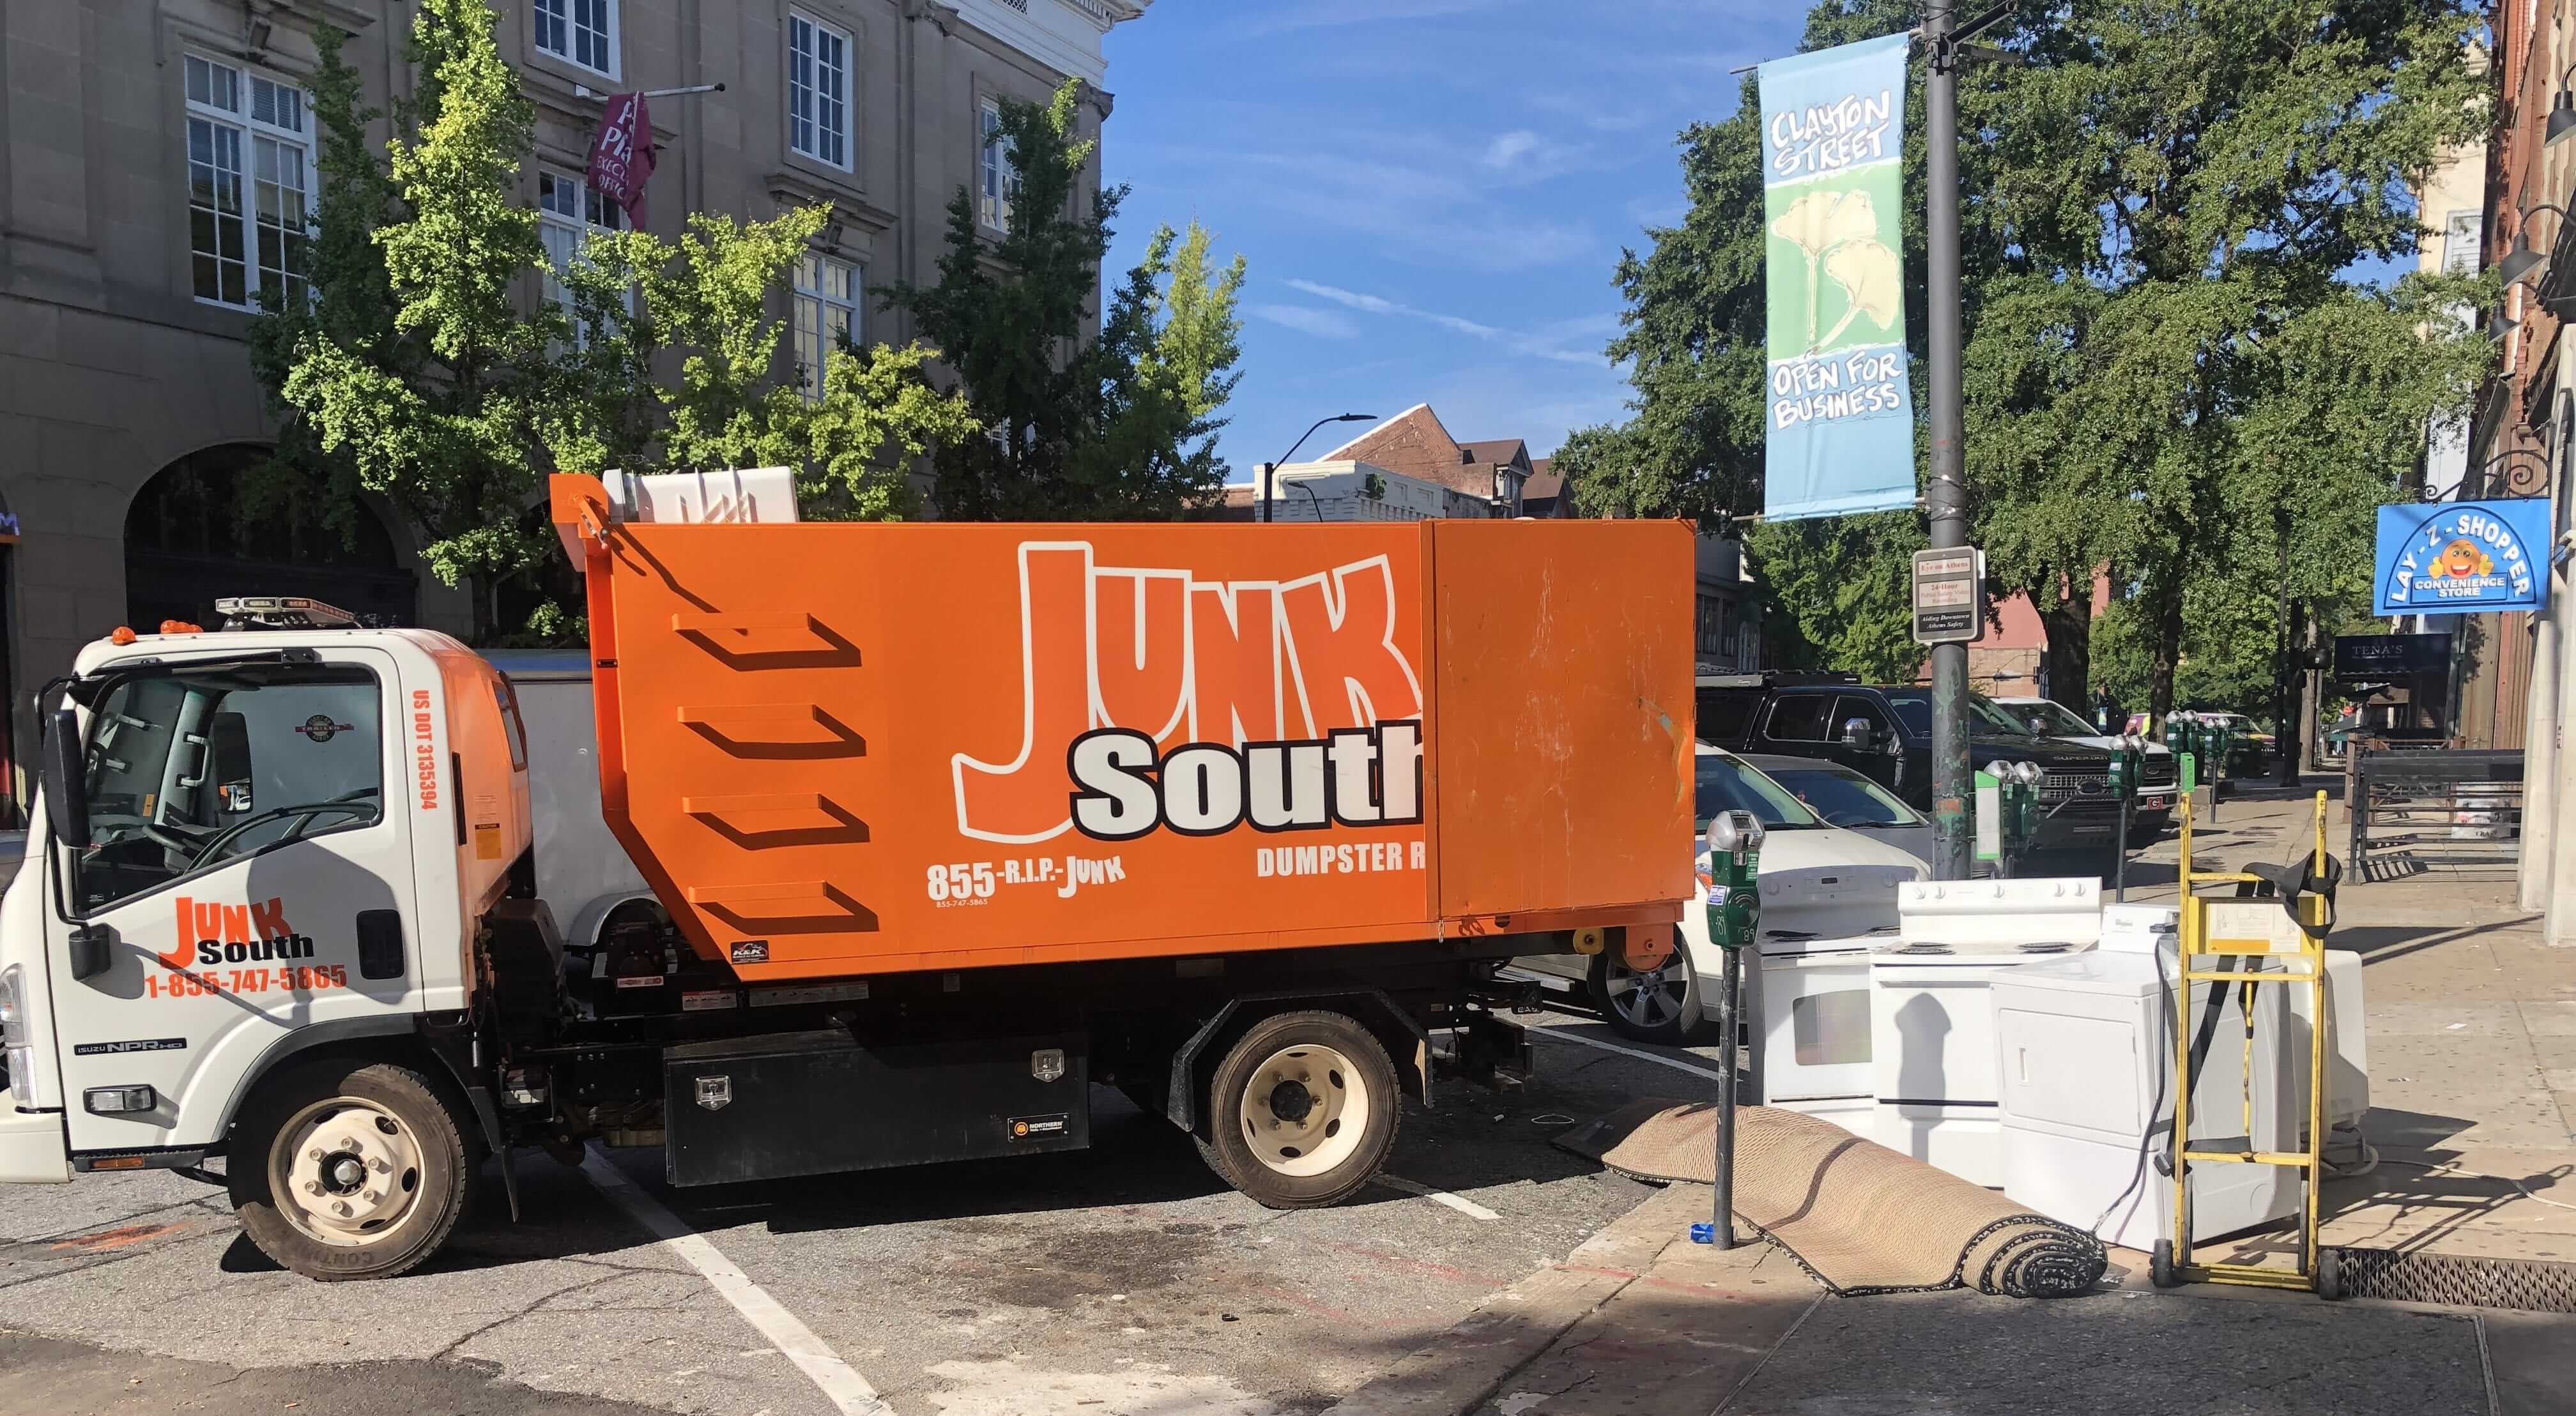 Junk South parked in Downtown Athens performing junk removal of old appliances